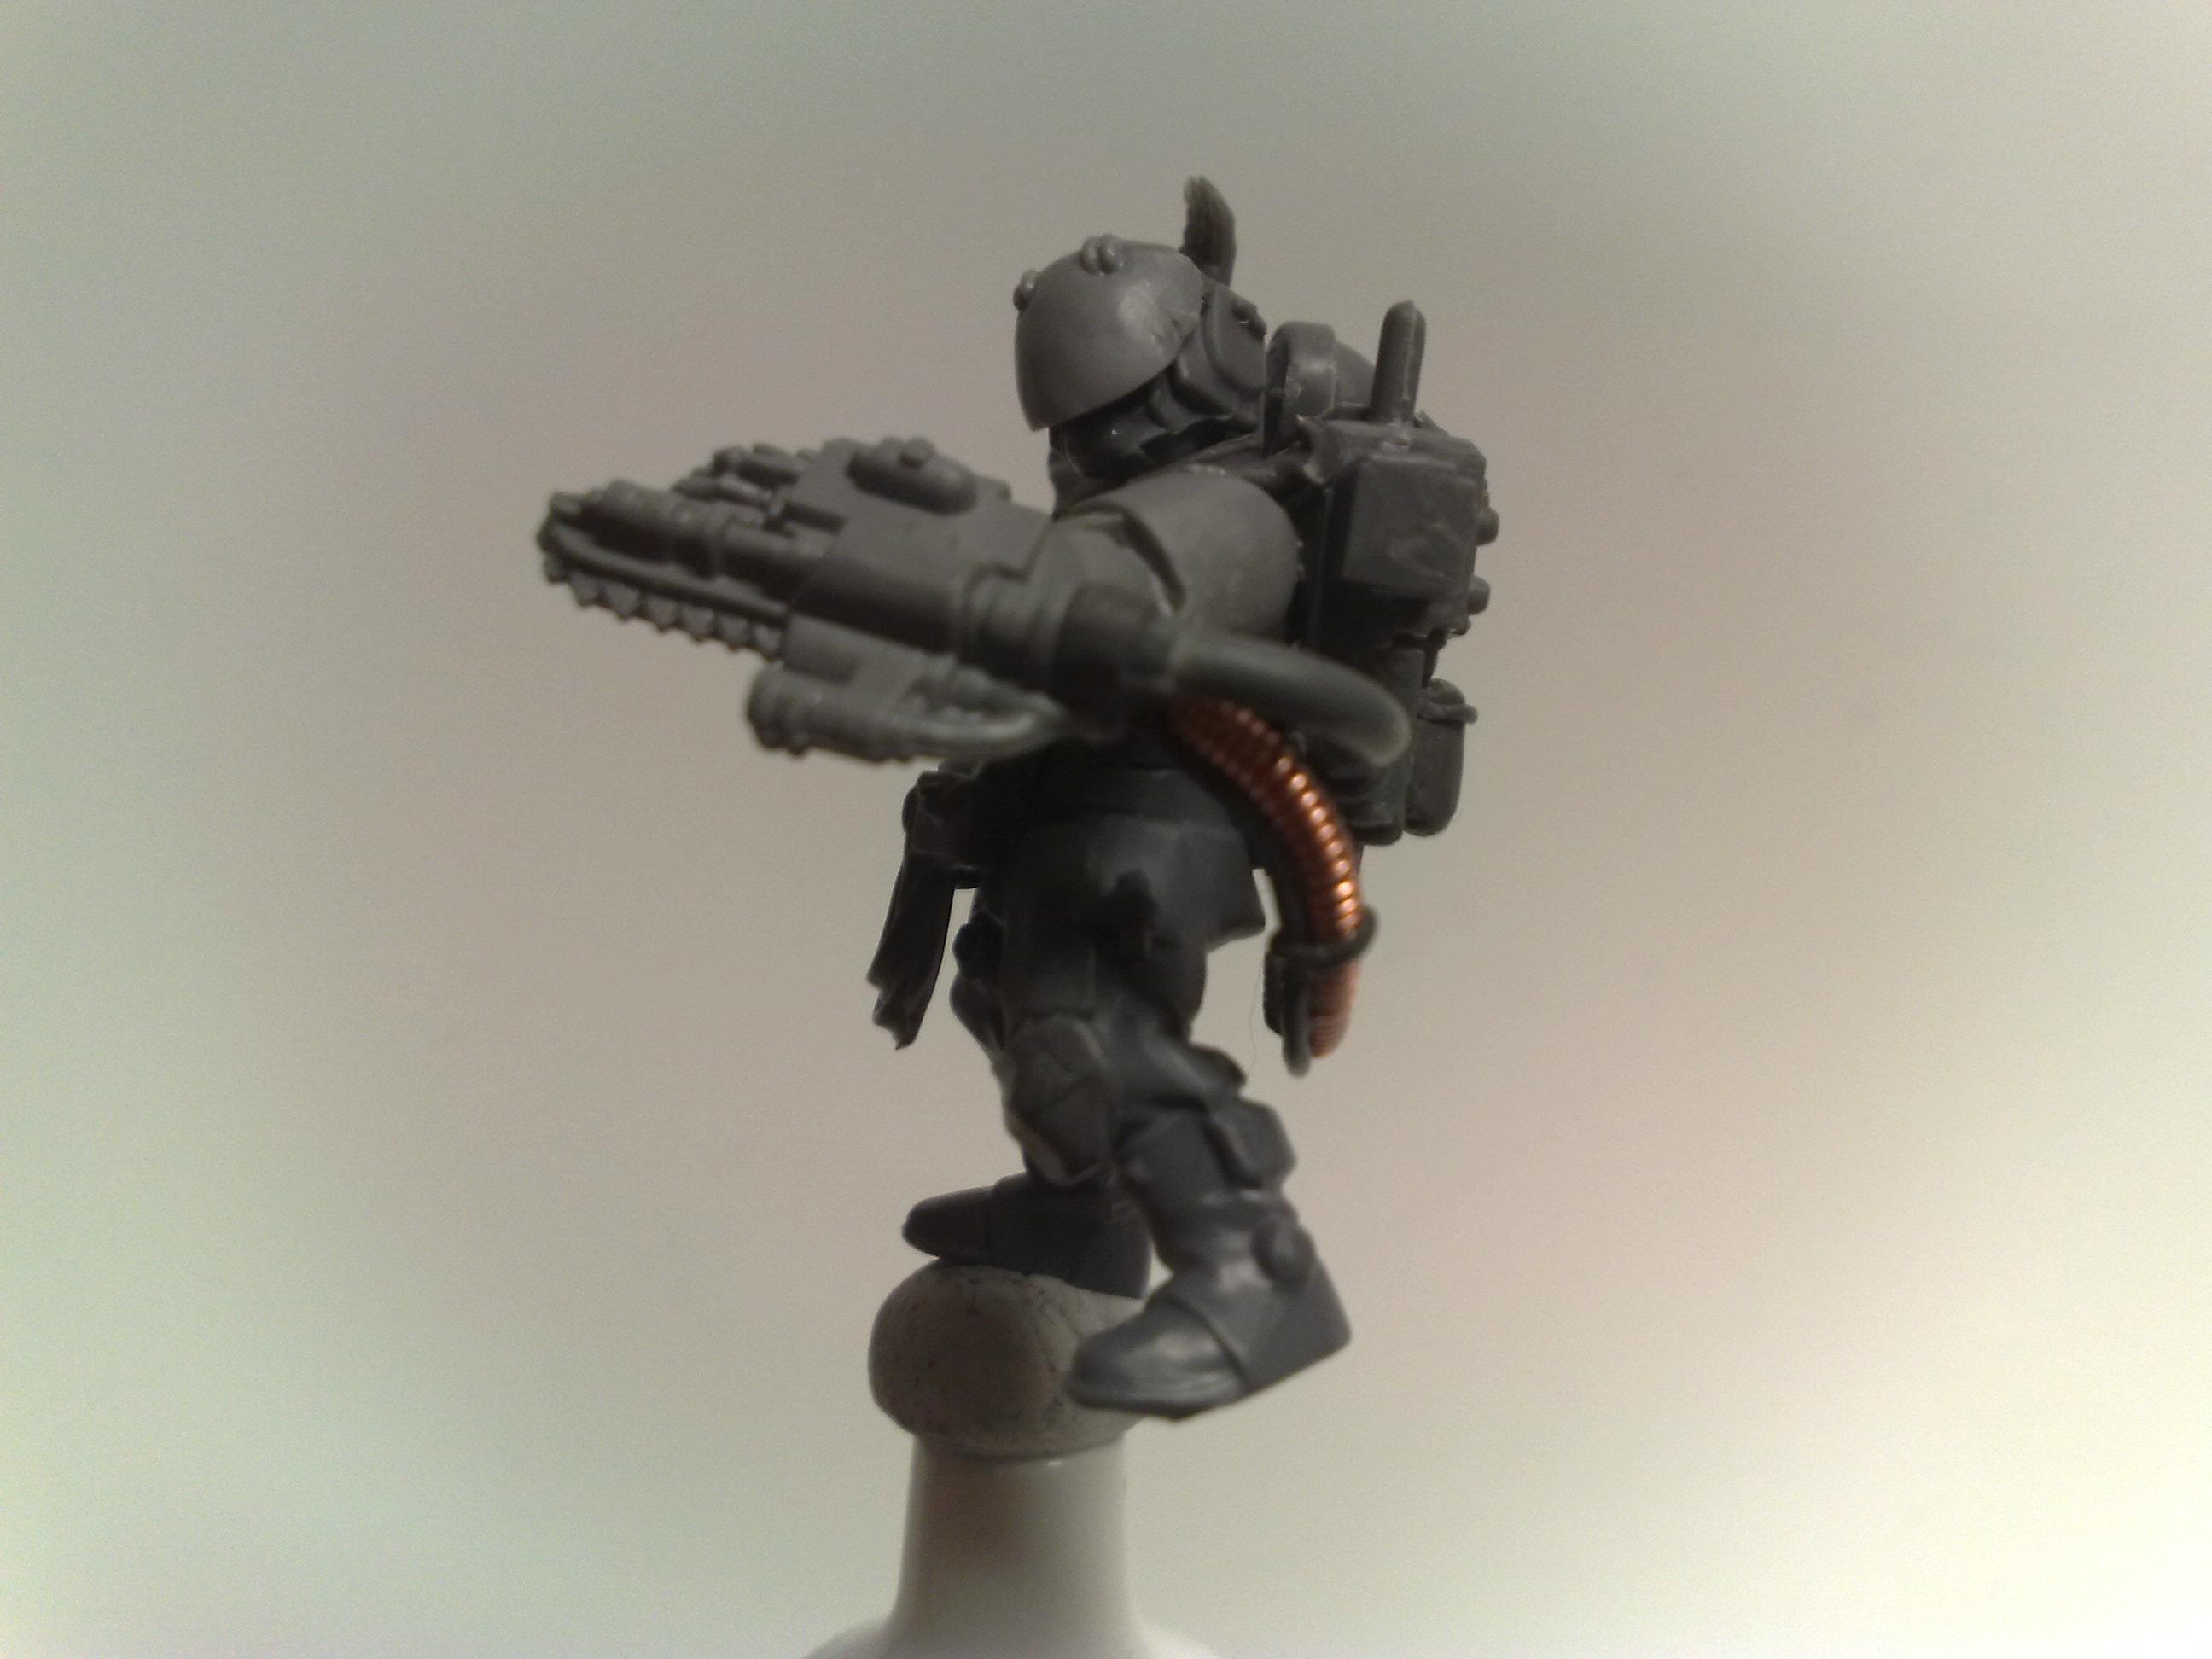 The chainfist, I used a space marine narthecium, sligthly modded